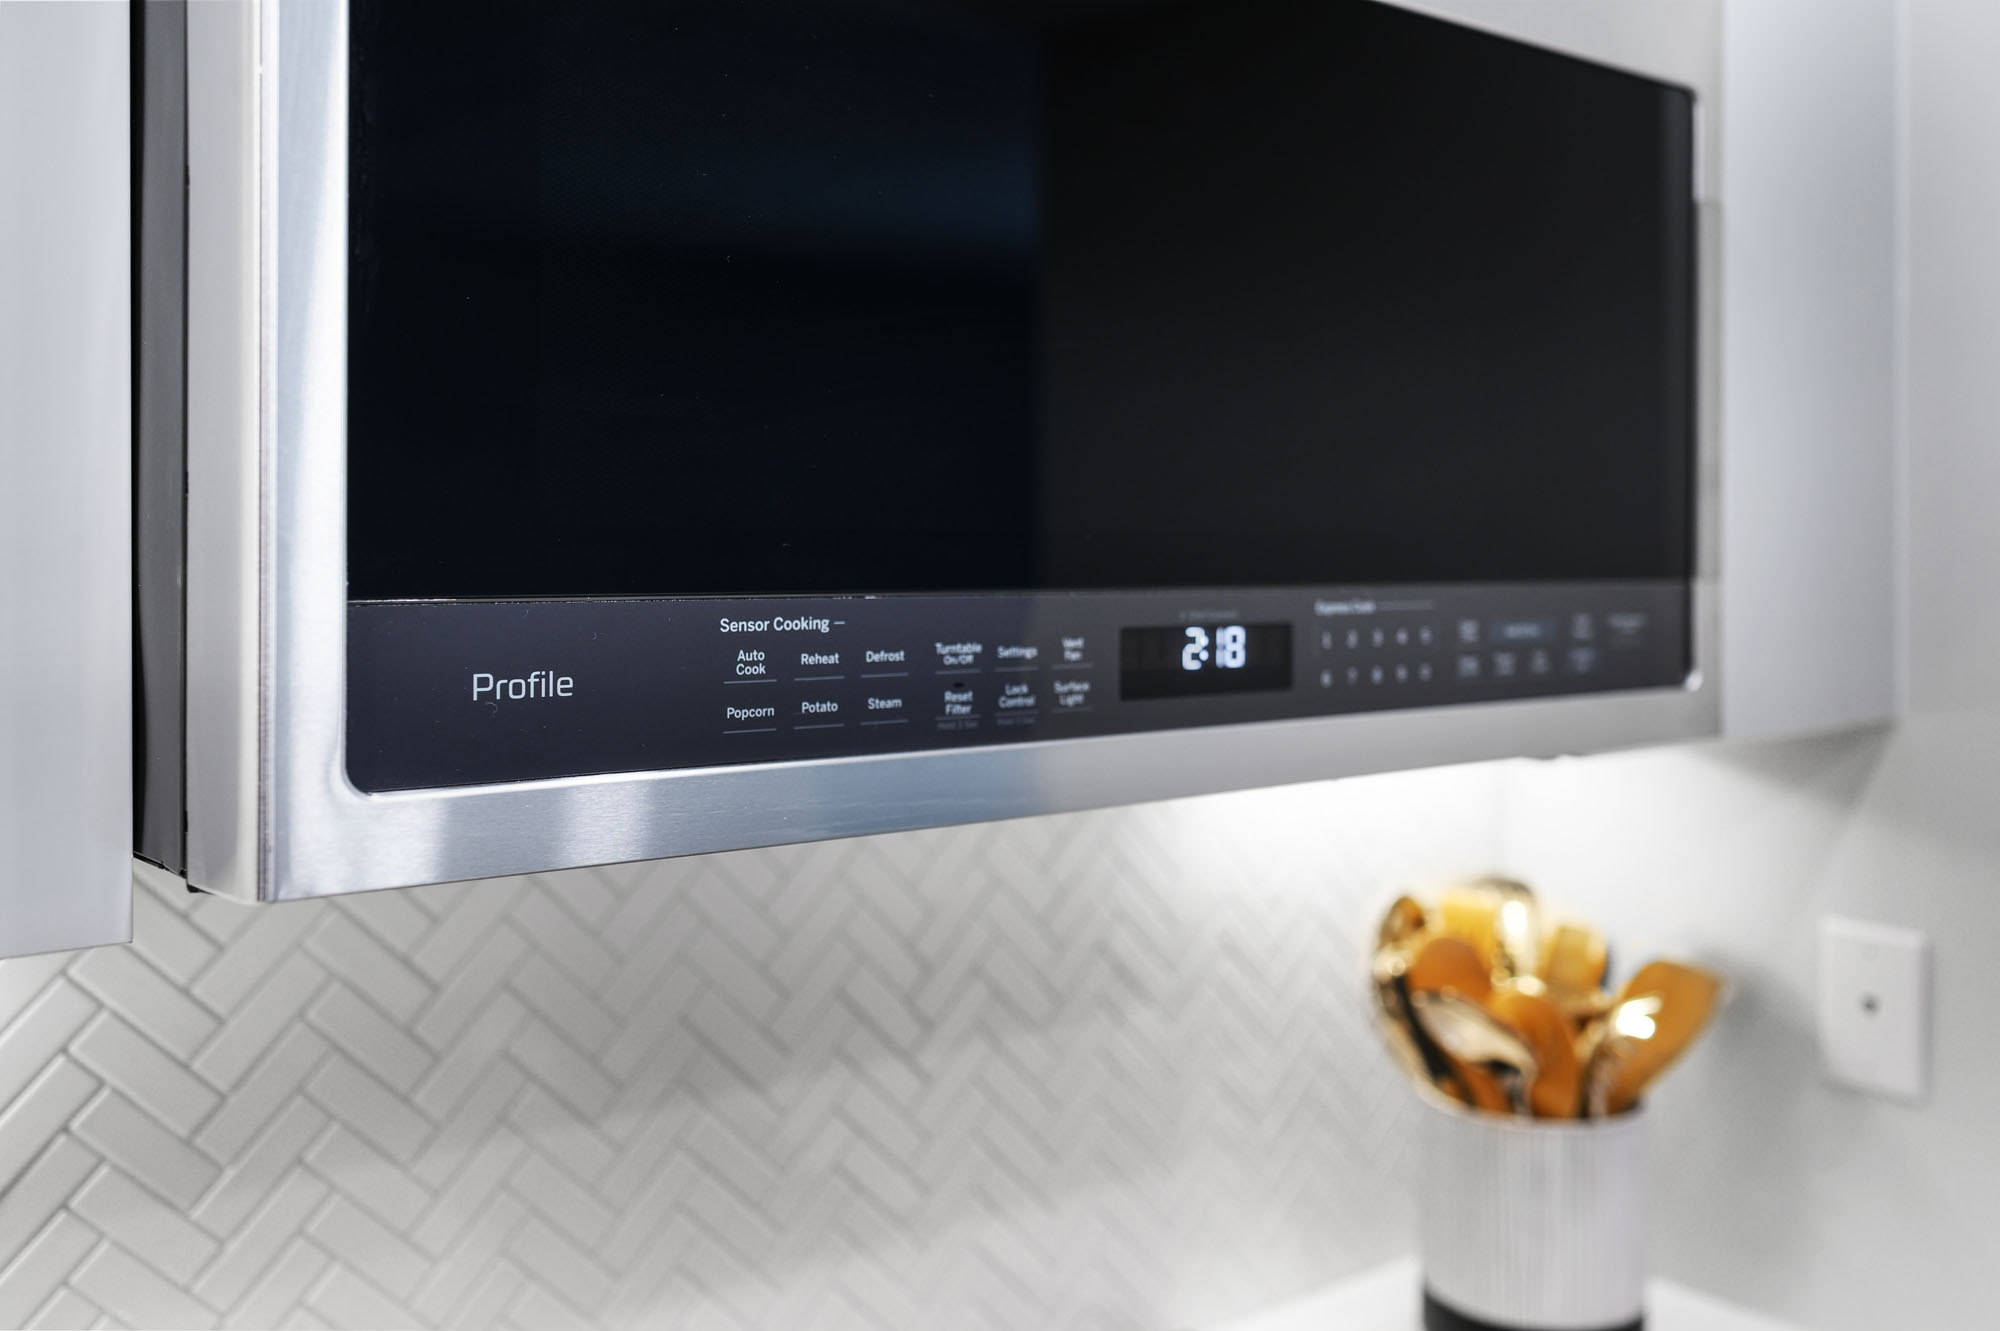 GE Profile external over-the-range microwave in stainless steel